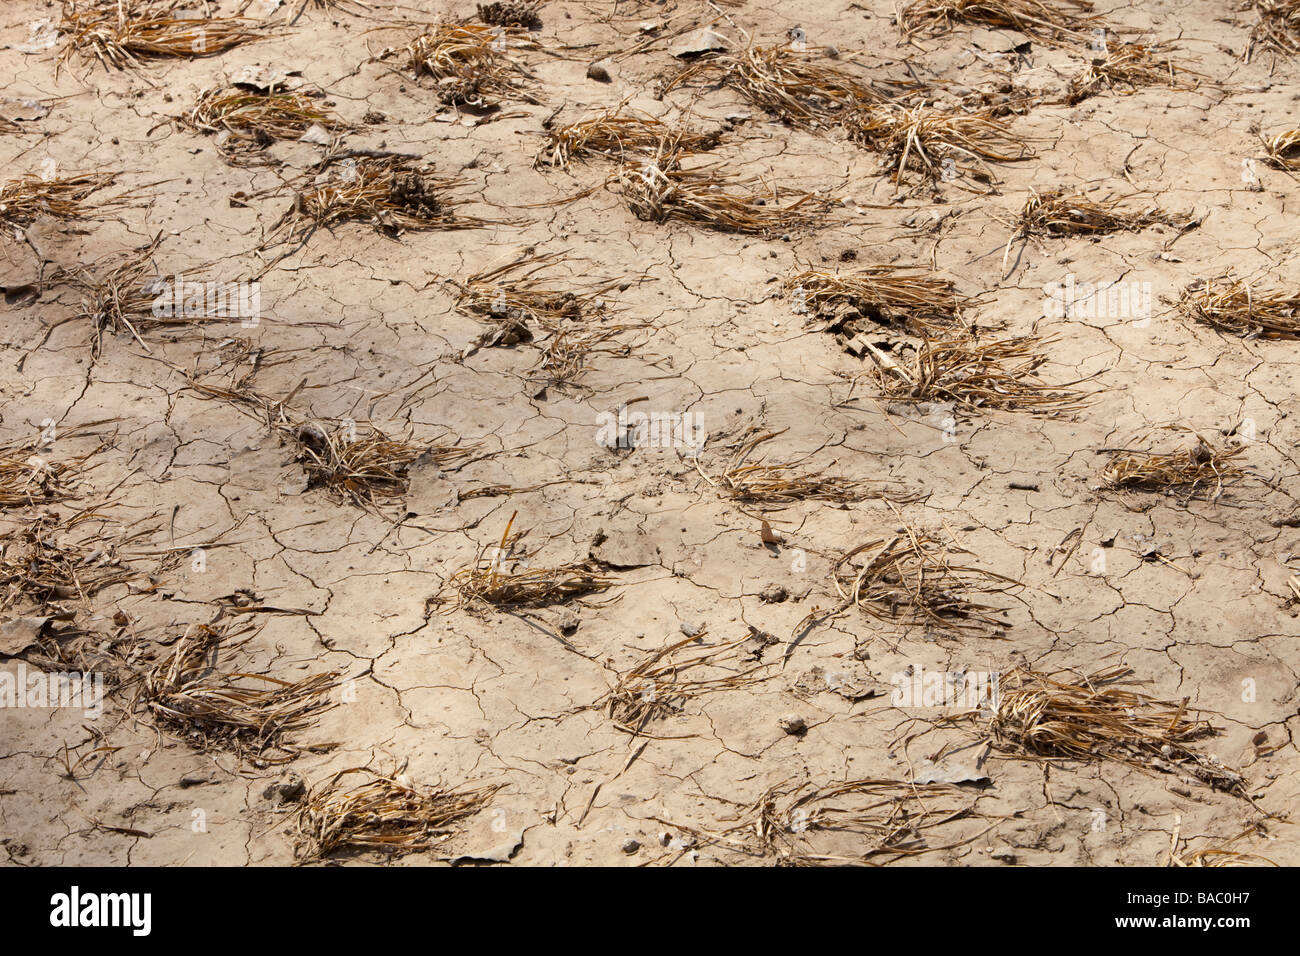 Crops dying in drought conditions brought on by climate change in northern China Stock Photo